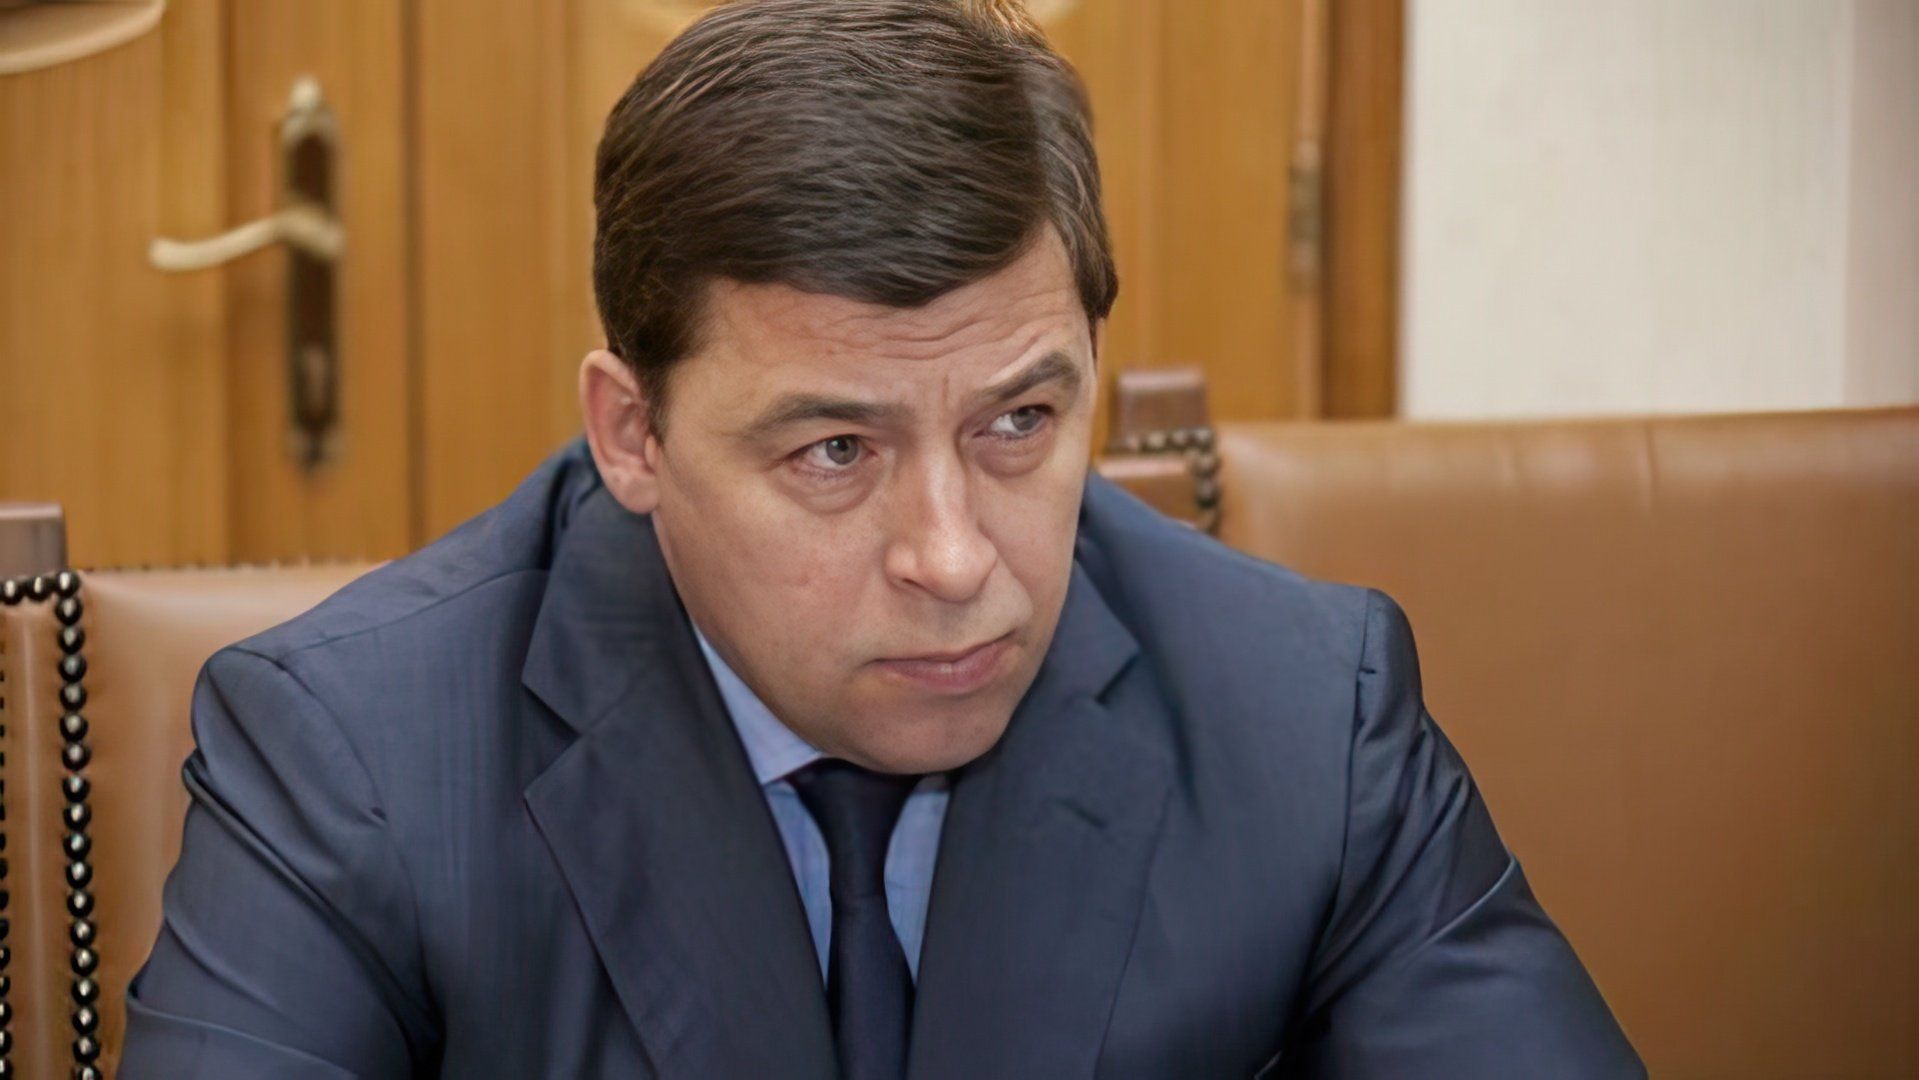 Inadequate behavior by Chairman of Yekaterinburg City Duma led to his dismissal